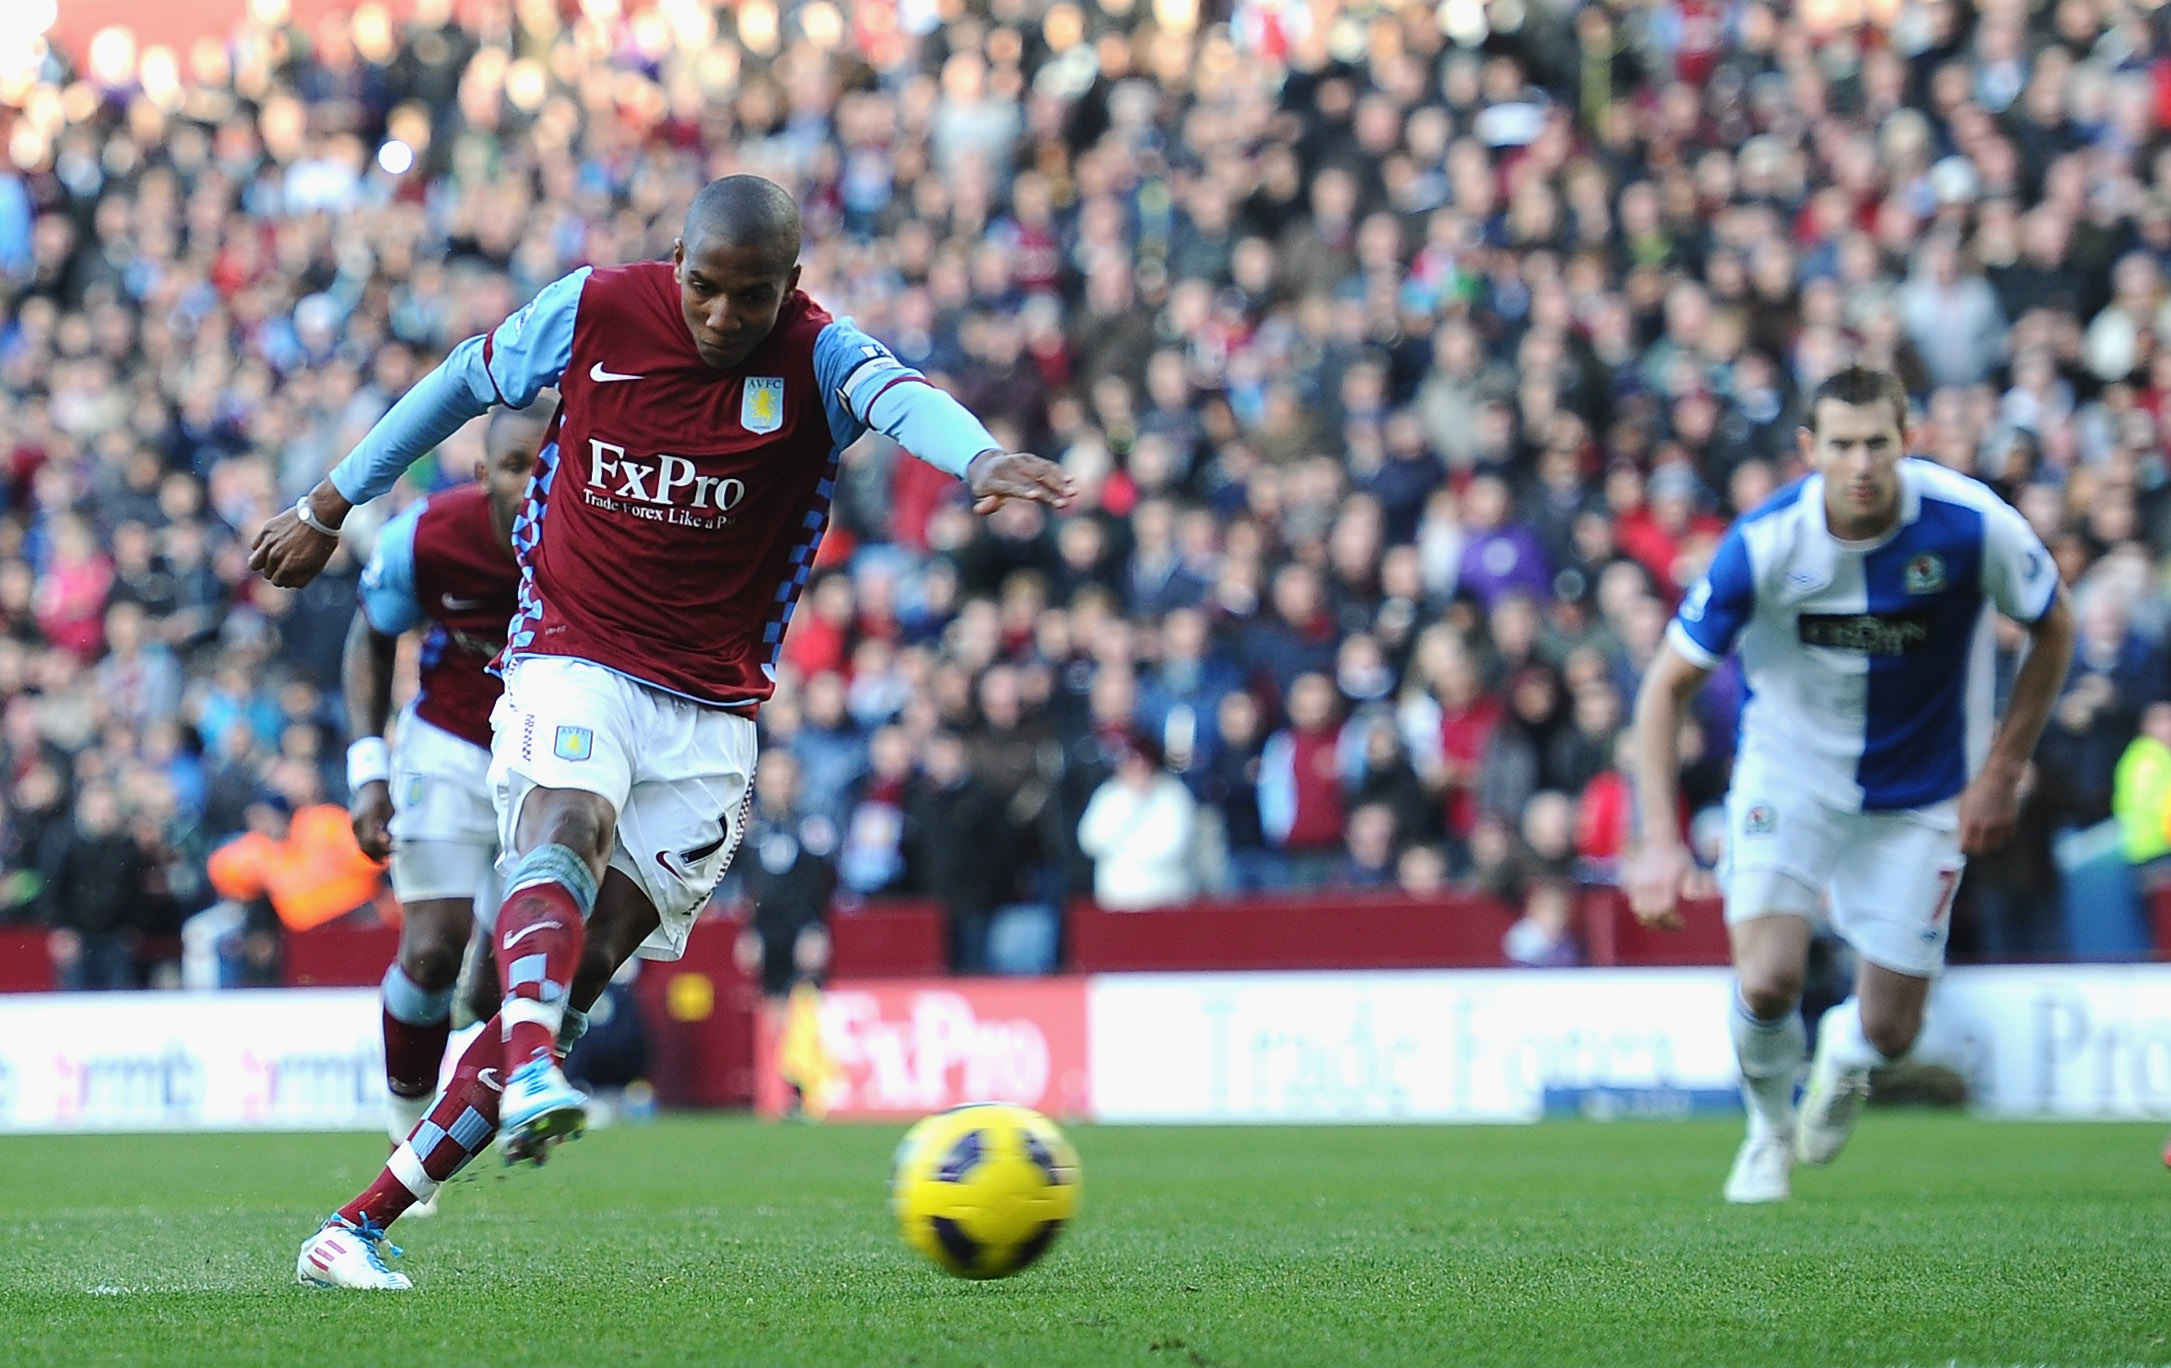 BIRMINGHAM, ENGLAND - FEBRUARY 26:  Ashley Young of Aston Villa scores from the penalty spot during the Barclays Premier League match between Aston Villa and Blackburn Rovers at Villa Park on February 26, 2011 in Birmingham, England.  (Photo by Laurence G